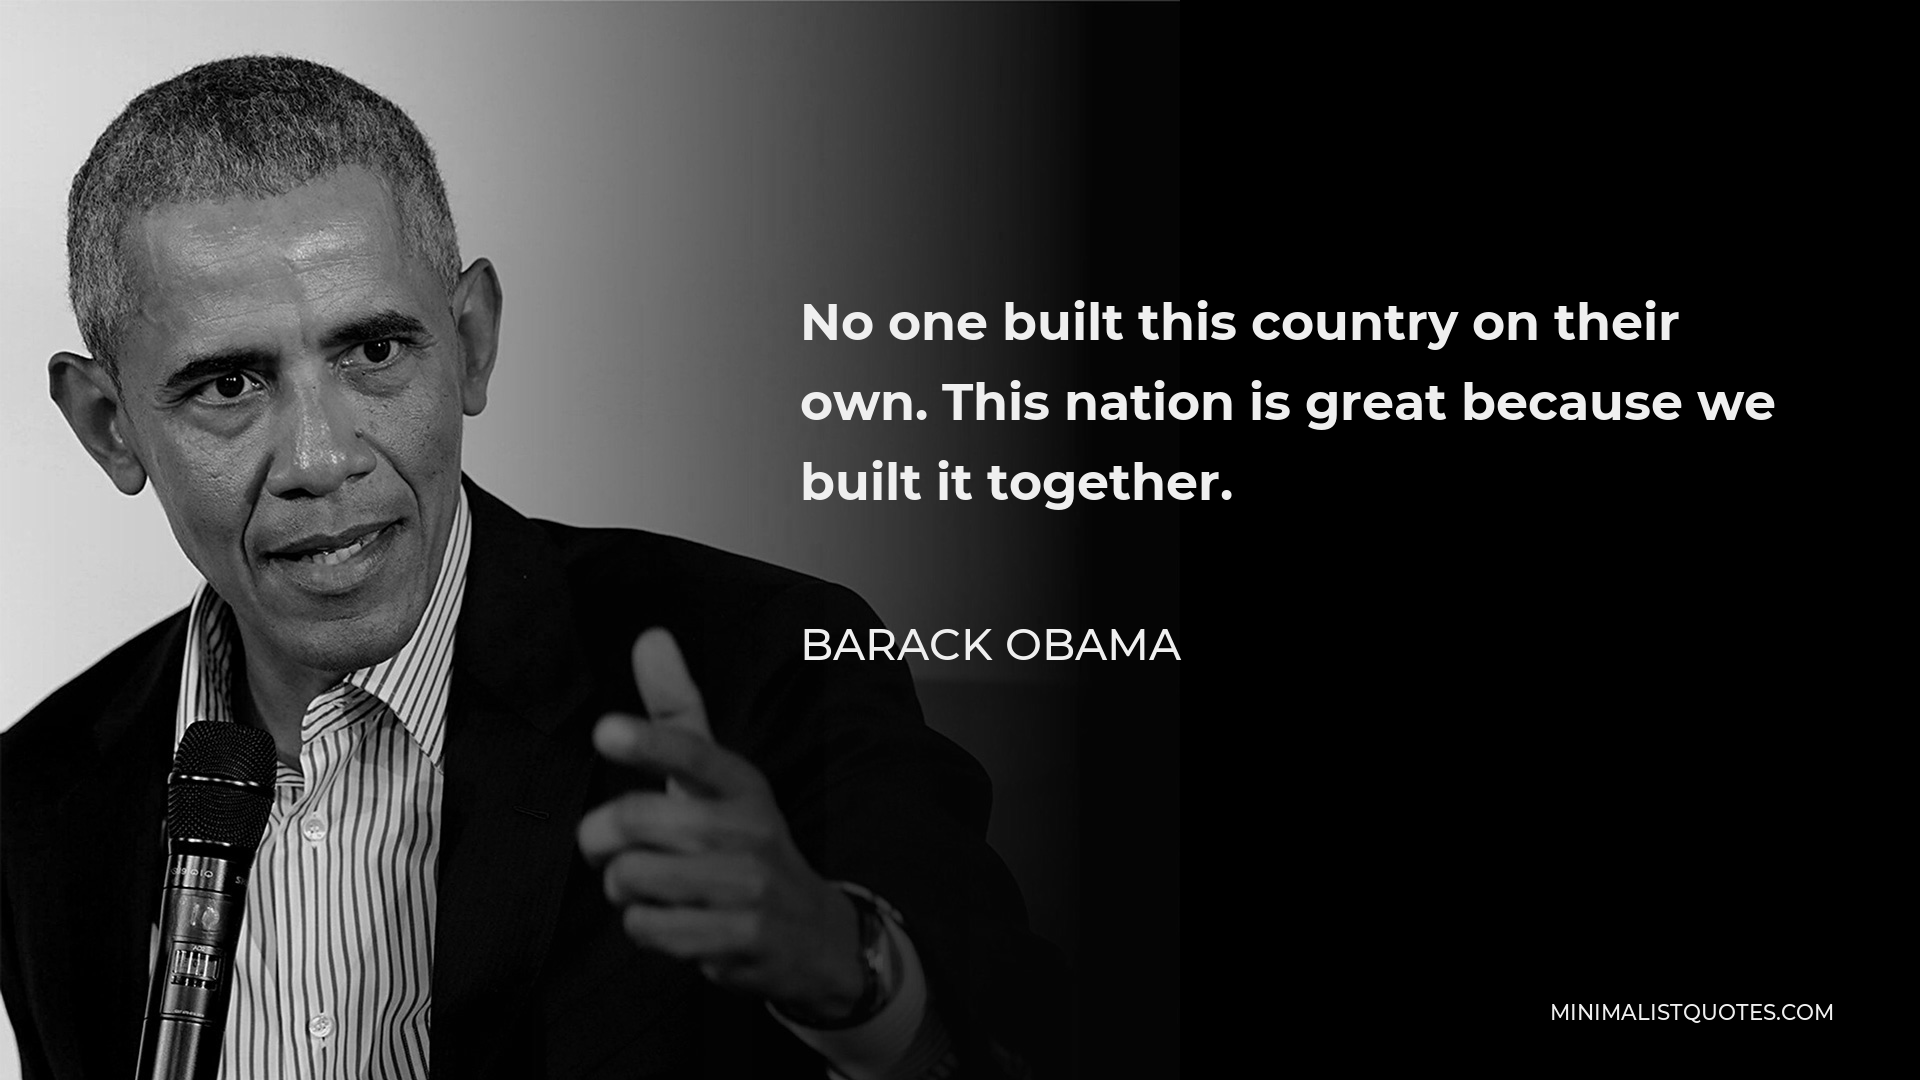 Barack Obama Quote - No one built this country on their own. This nation is great because we built it together.